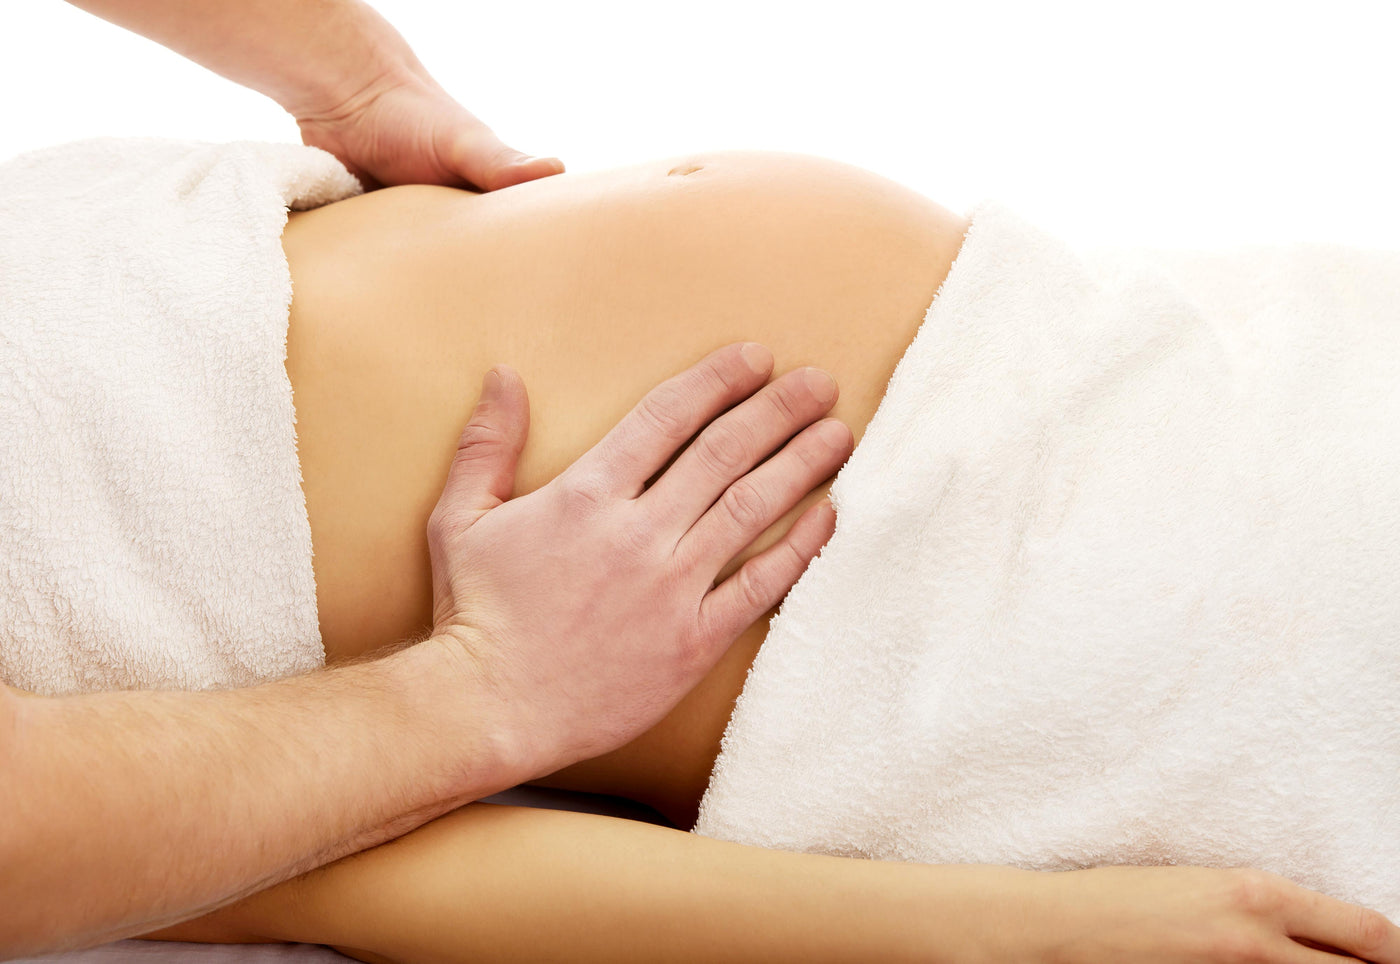 Is Prenatal Massage Safe? Here’s Top 5 Reason Why It’s Beneficial For Expecting Mommies